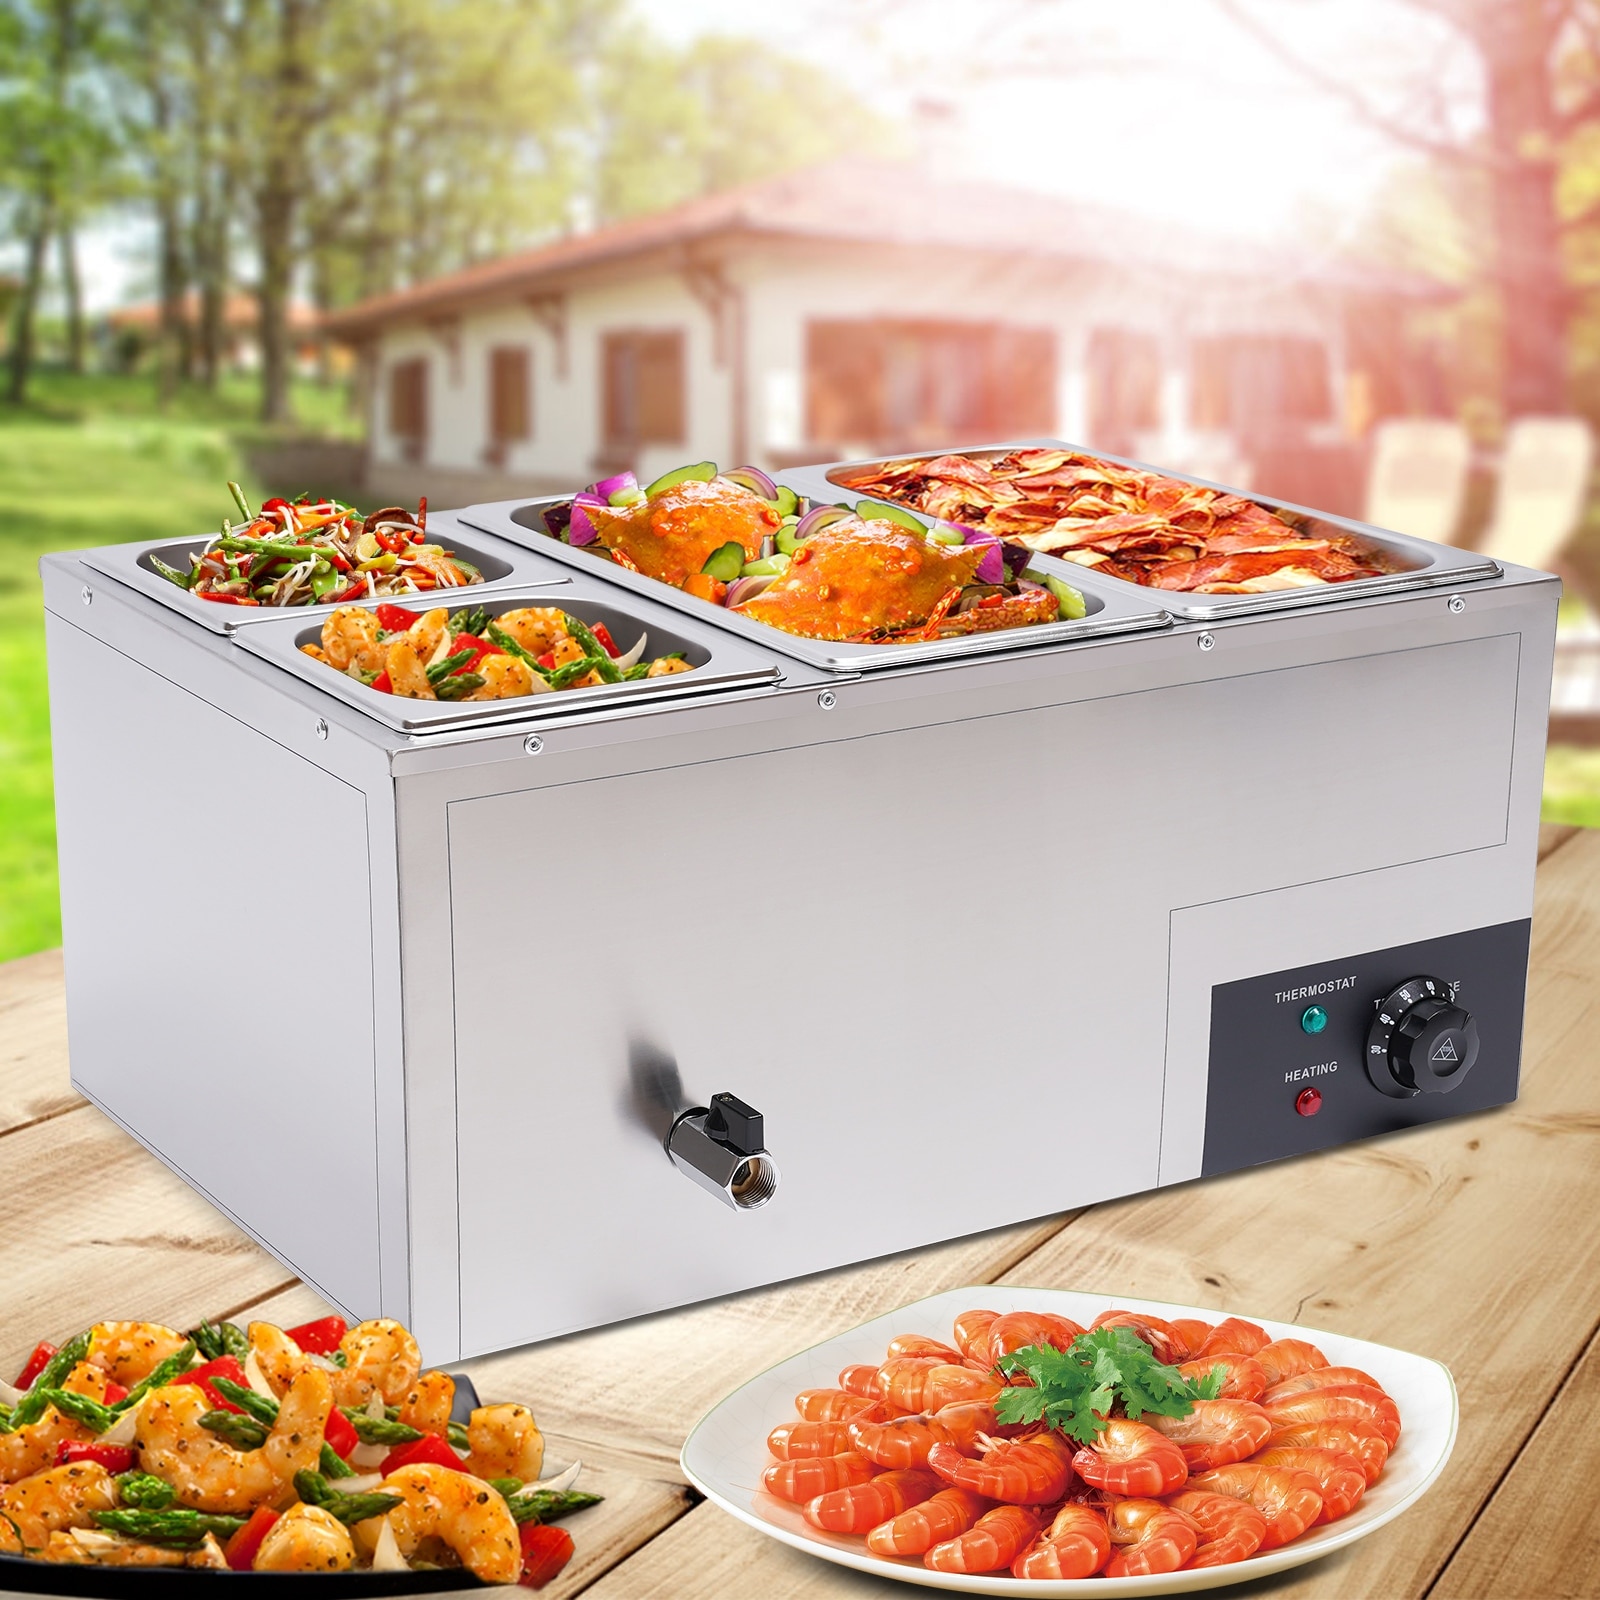 https://ak1.ostkcdn.com/images/products/is/images/direct/60360b578d450b20b3d923c99bf28f6144cc96ec/4-Pan-Stainless-Steel-Countertop-Food-Warmer-Temperature-Control.jpg